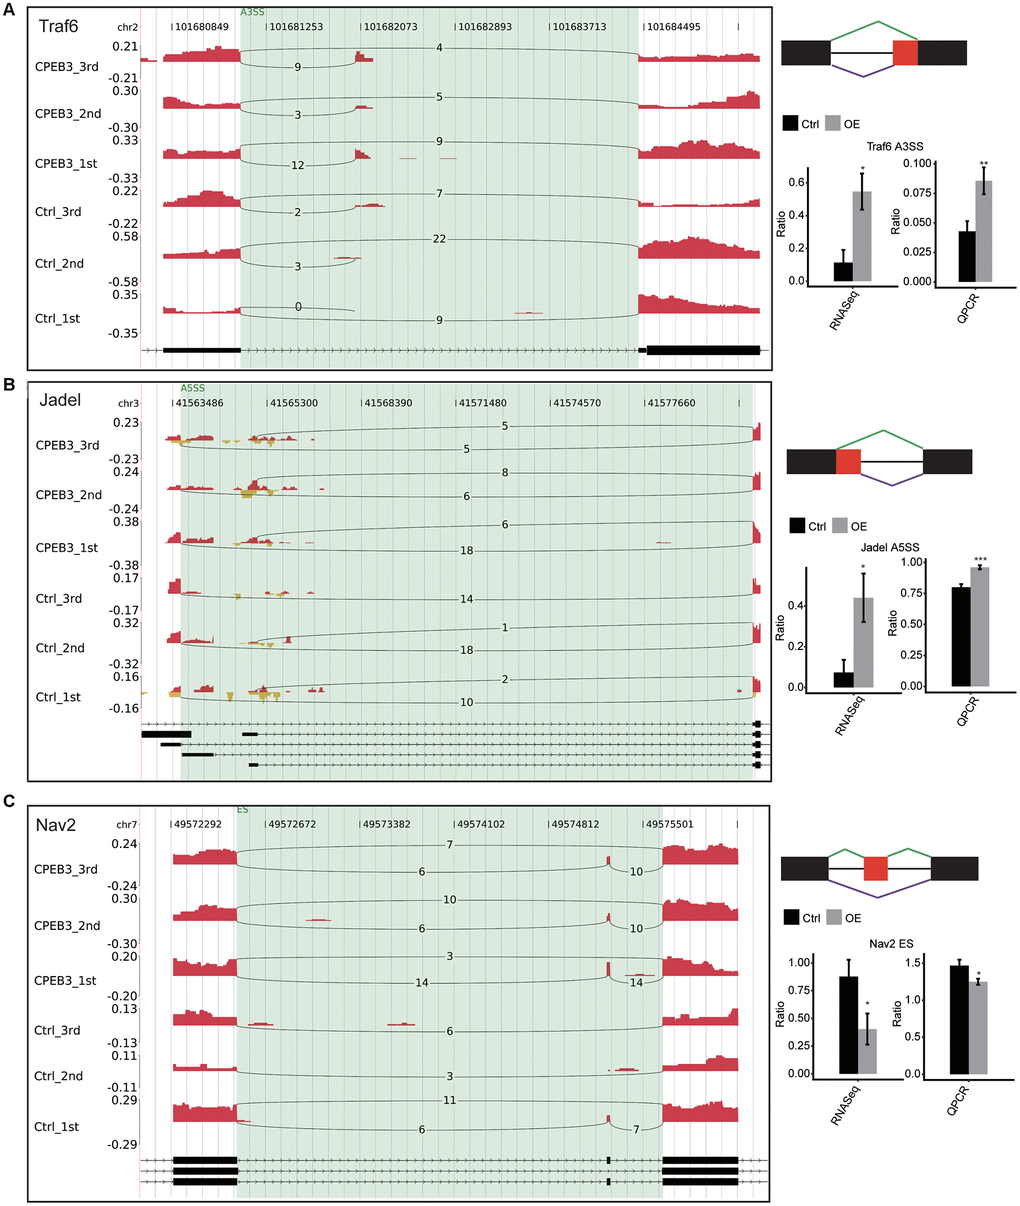 Validation of CPEB3 regulated AS events. (A–C) IGV-sashimi plot showed an alternative 3’ splicing sites (A), an exon skipping (B), and a cassette exon (C) events in three different genes. Reads variations on the alternative exon were plotted in the left panel with the transcripts shown below. The schematic diagrams depict the structures of ASEs, AS1 (purple line), and AS2 (green line). The constitutive exon sequences are denoted by black boxes, intron sequences by a horizontal line (right panel, top), while alternative exon by the red box. RNA-seq quantification and RT-qPCR validation of ASEs are shown at the bottom of the right panel. Error bars represent mean ± SEM. *p 